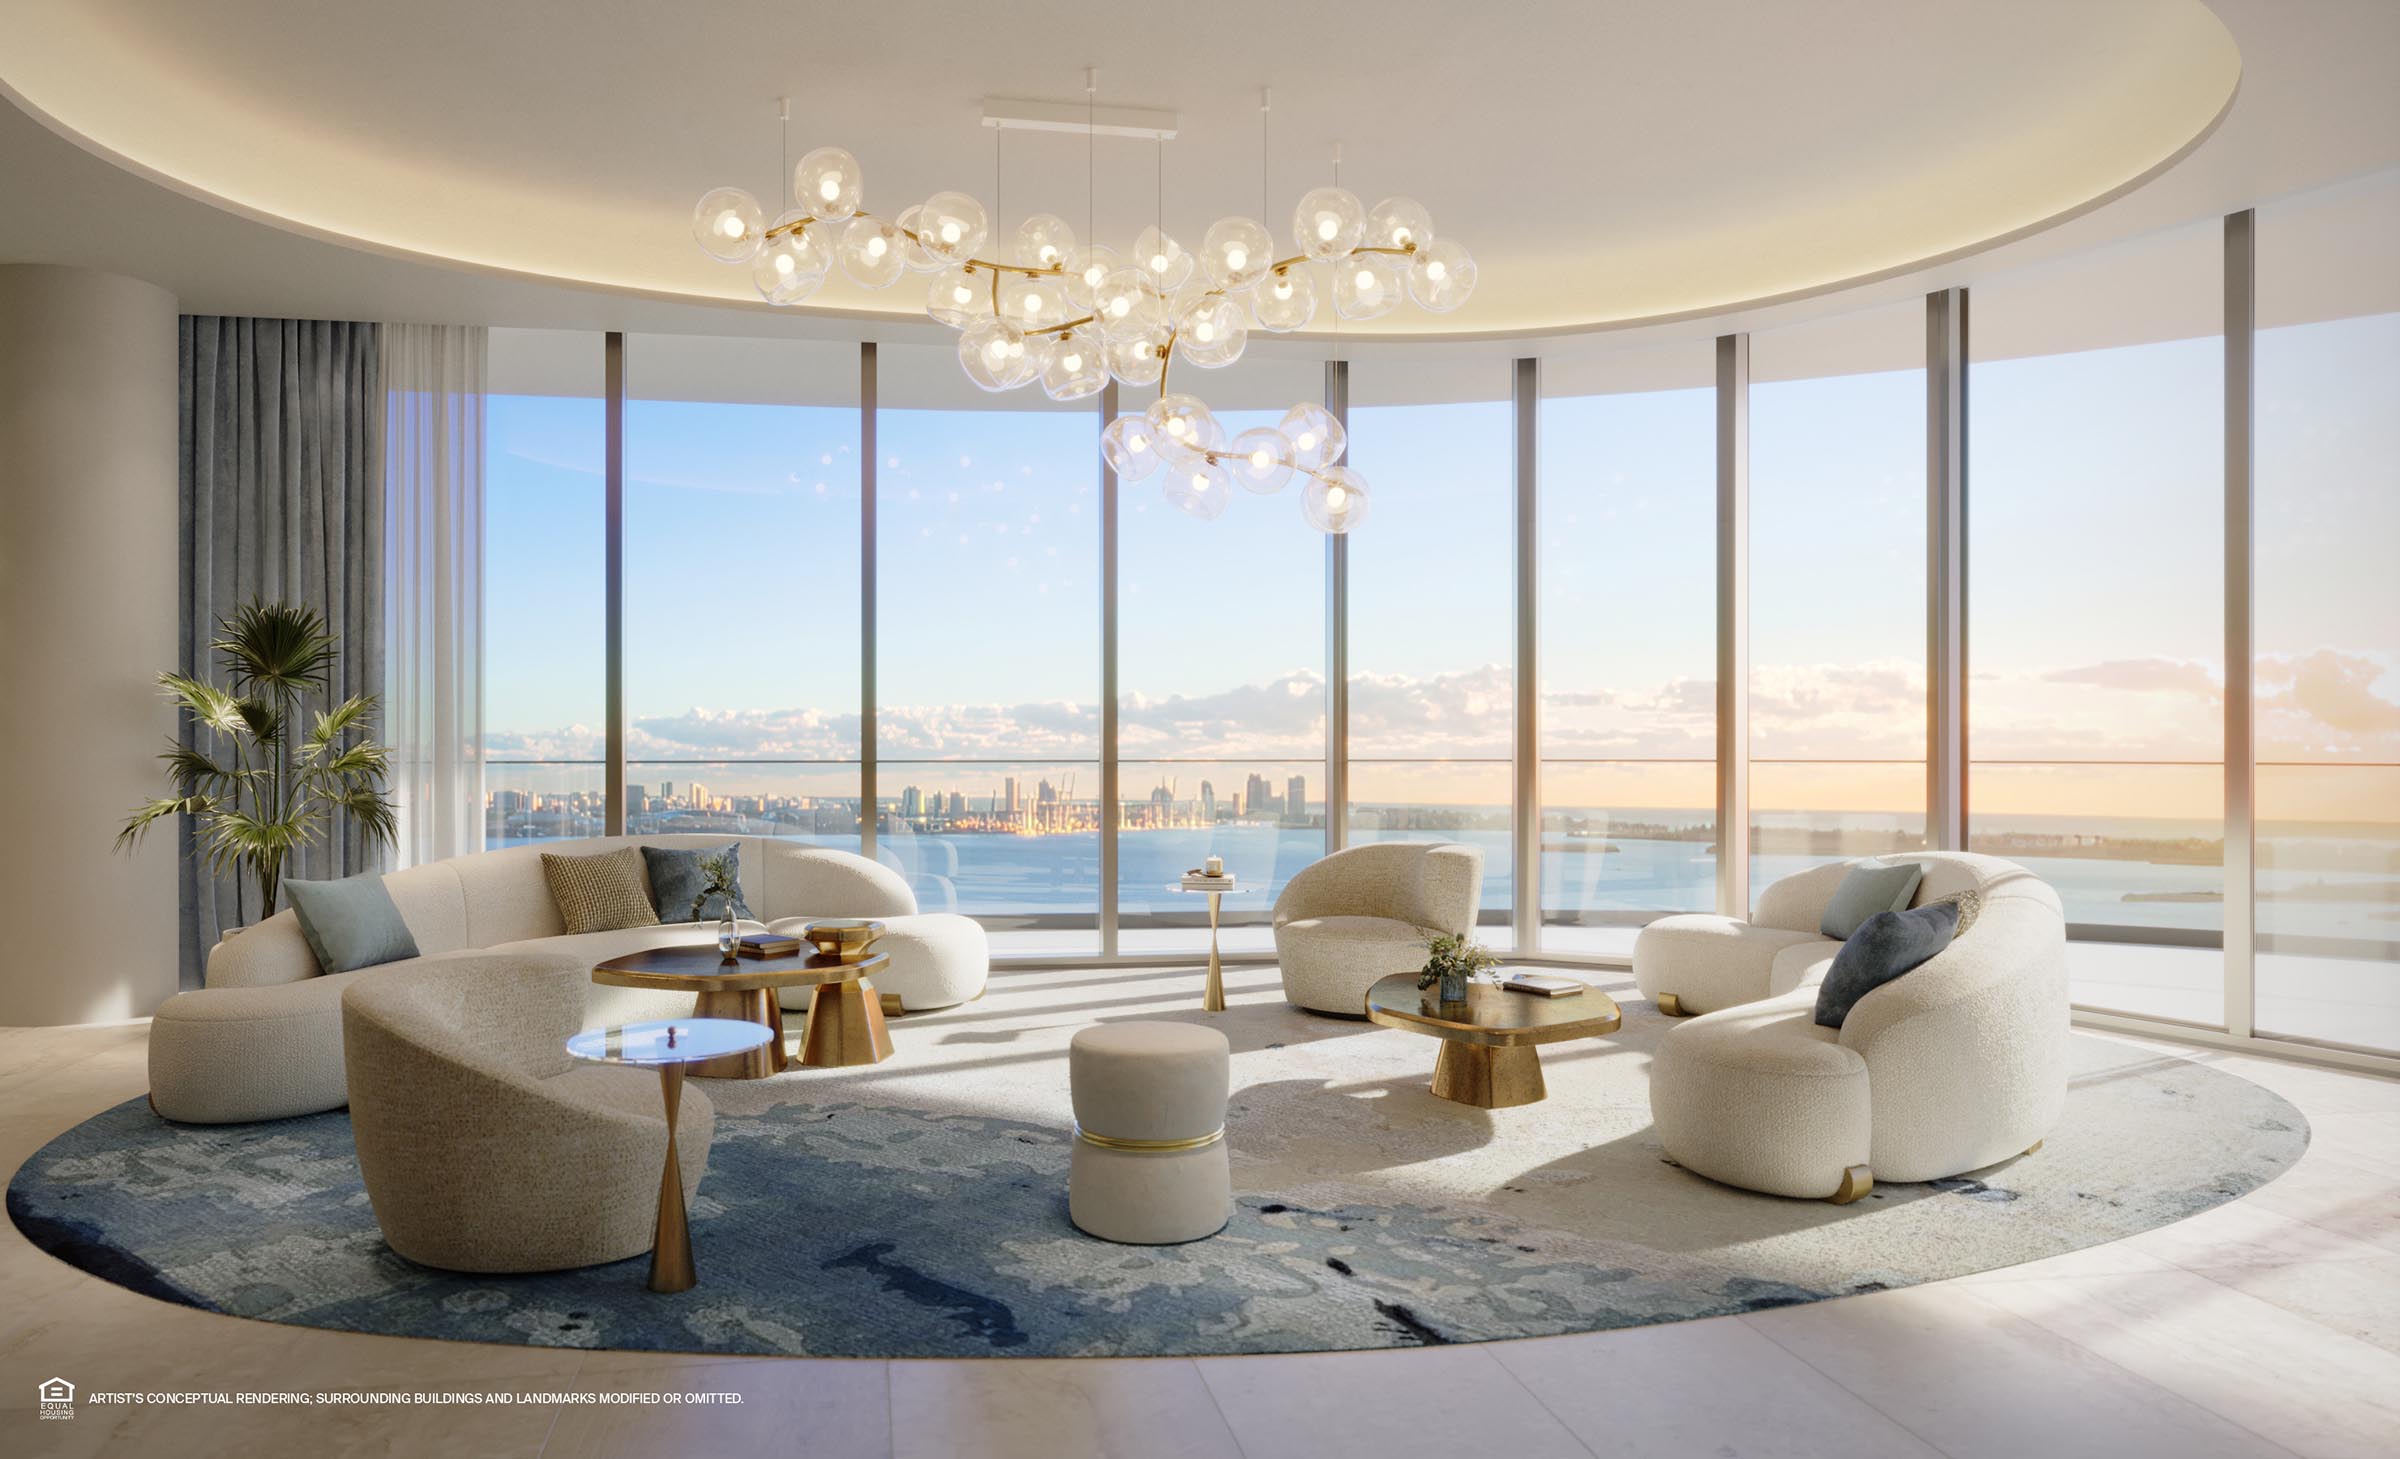 Discover The Opulent $45 Million Penthouse At Brickell’s St. Regis Residences, Miami